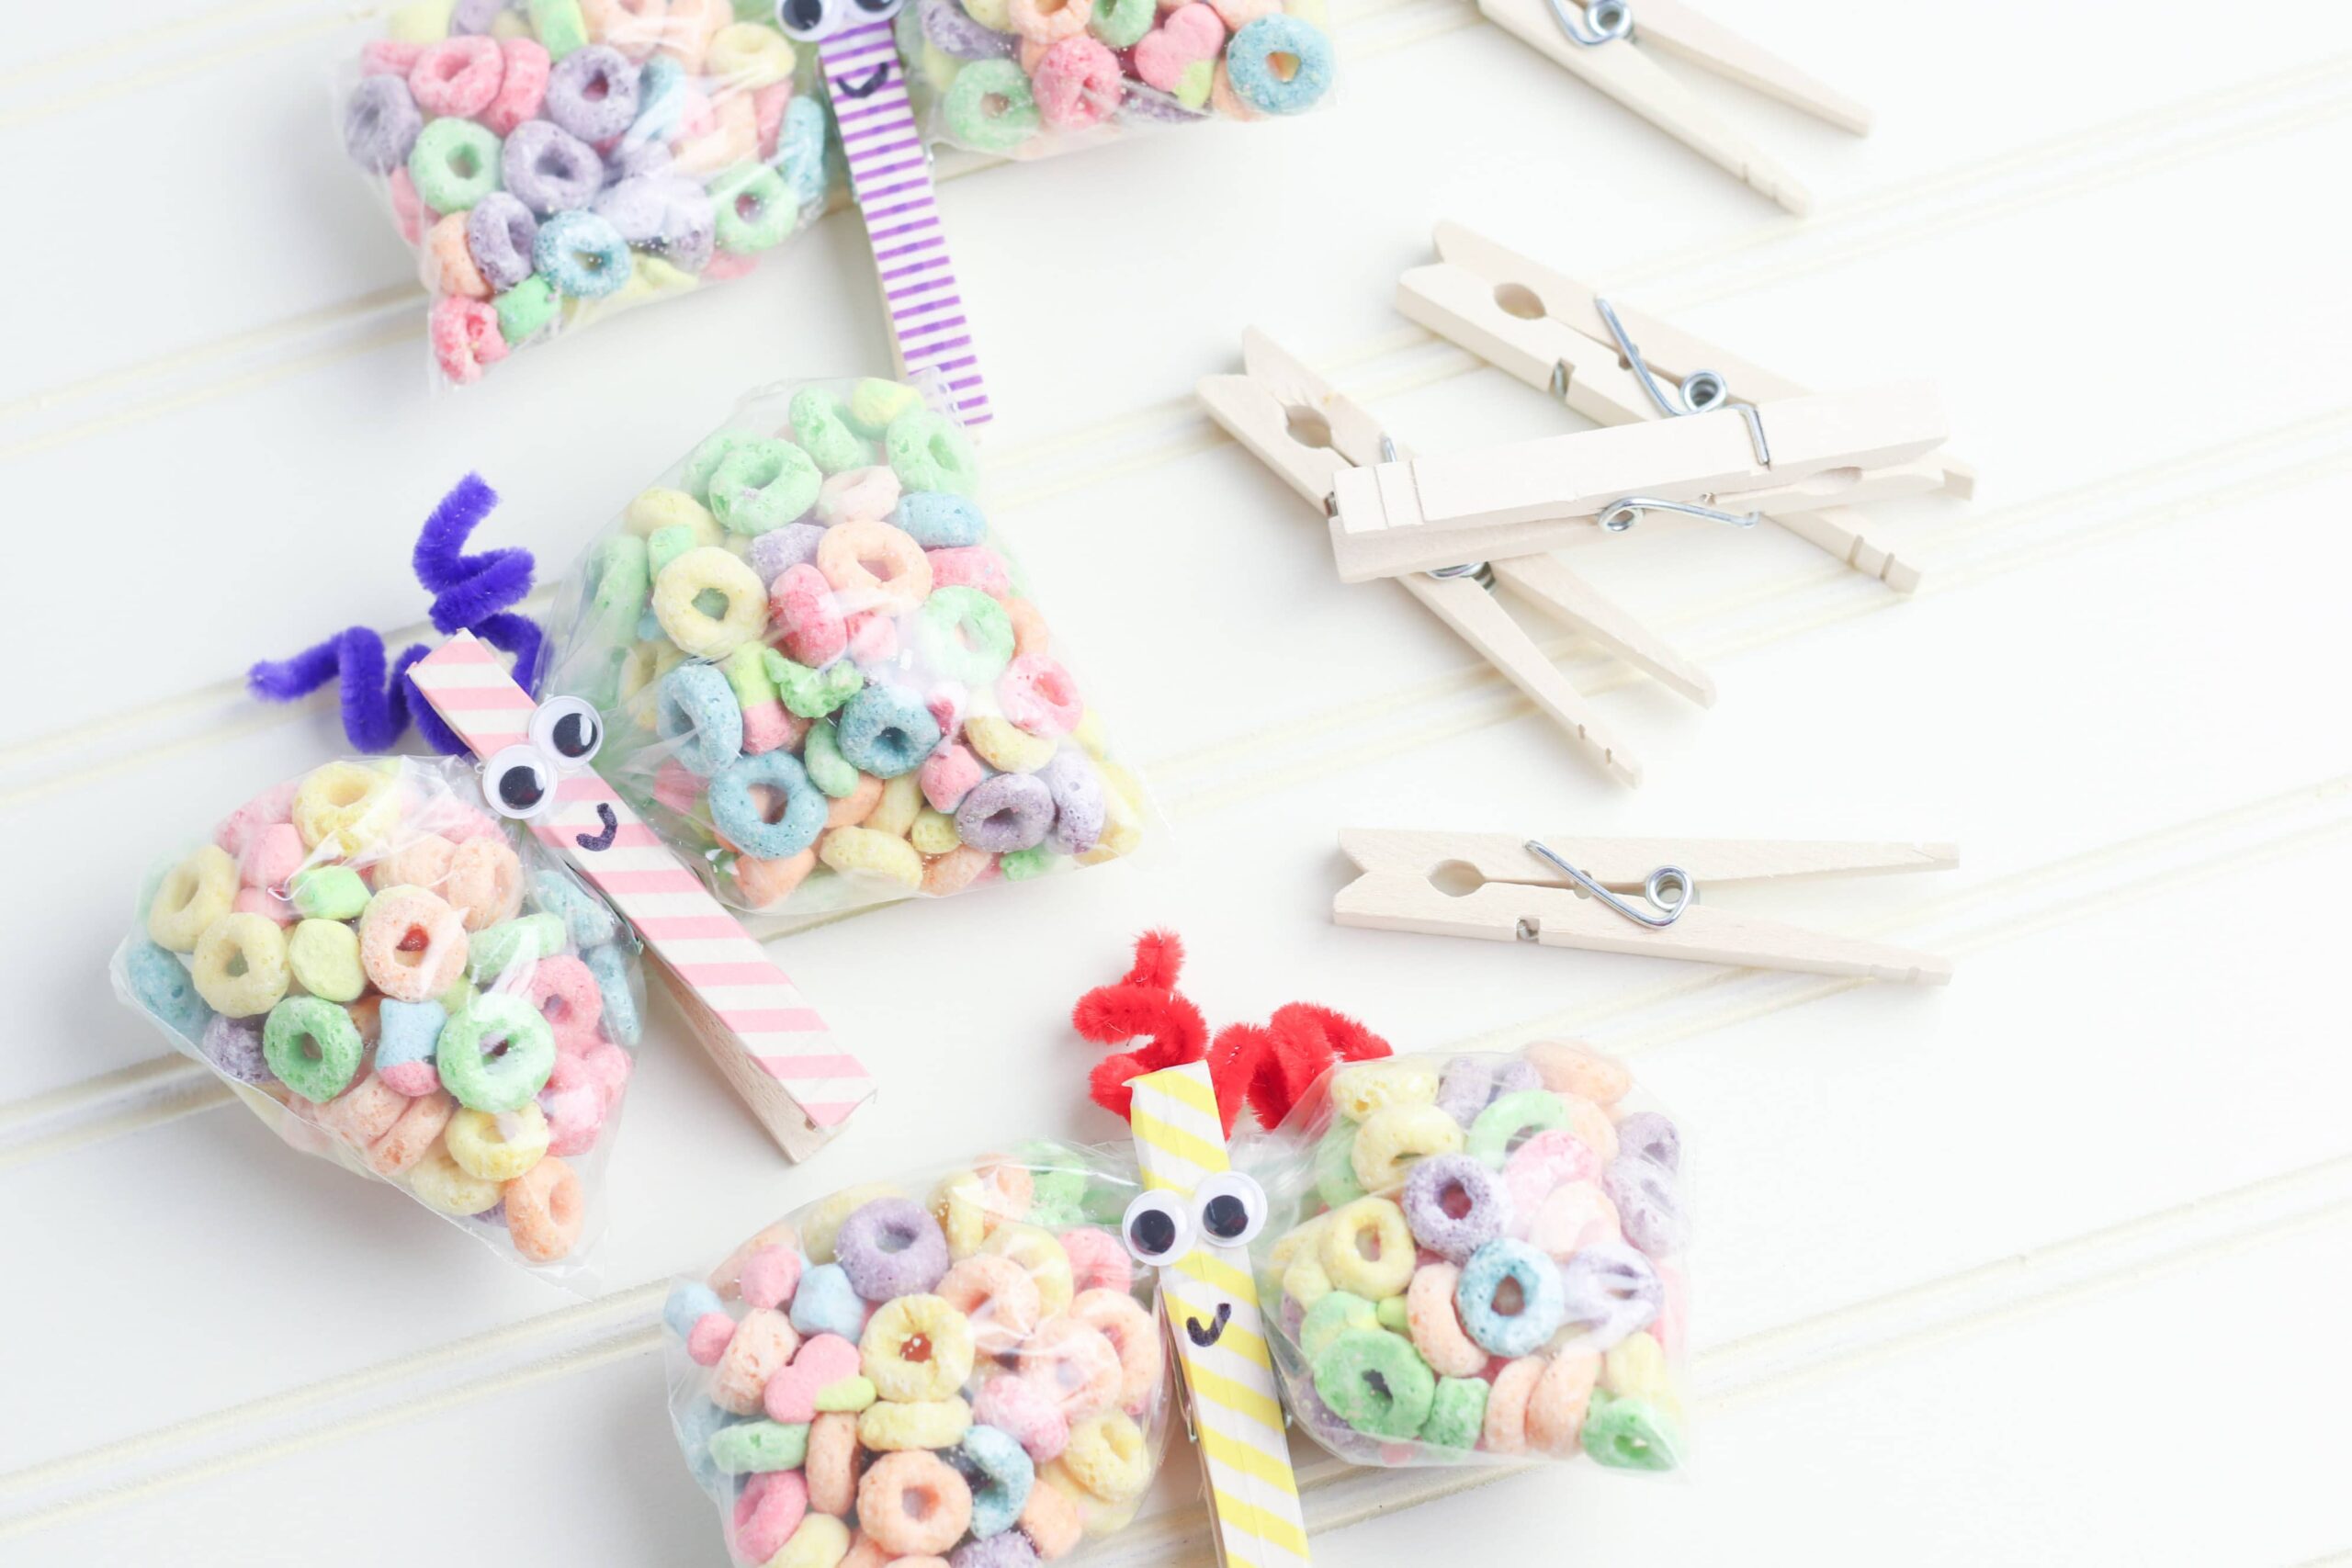 https://mommyhoodlife.com/wp-content/uploads/2021/05/Butterfly-Snack-Bags-DIY-scaled.jpg